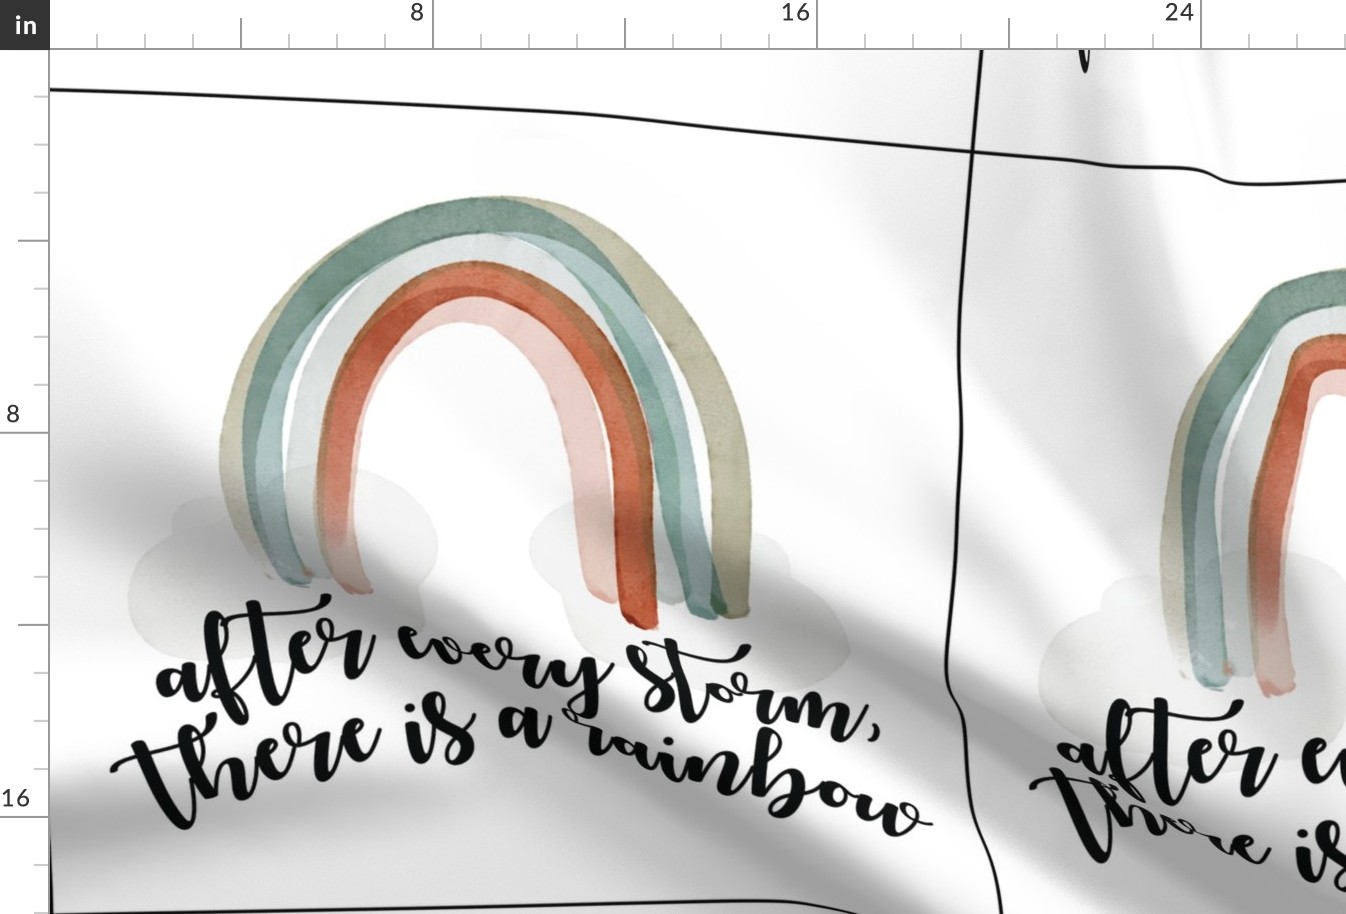 6 loveys: after every storm there is a rainbow + neutral rainbow no. 2 // bold script